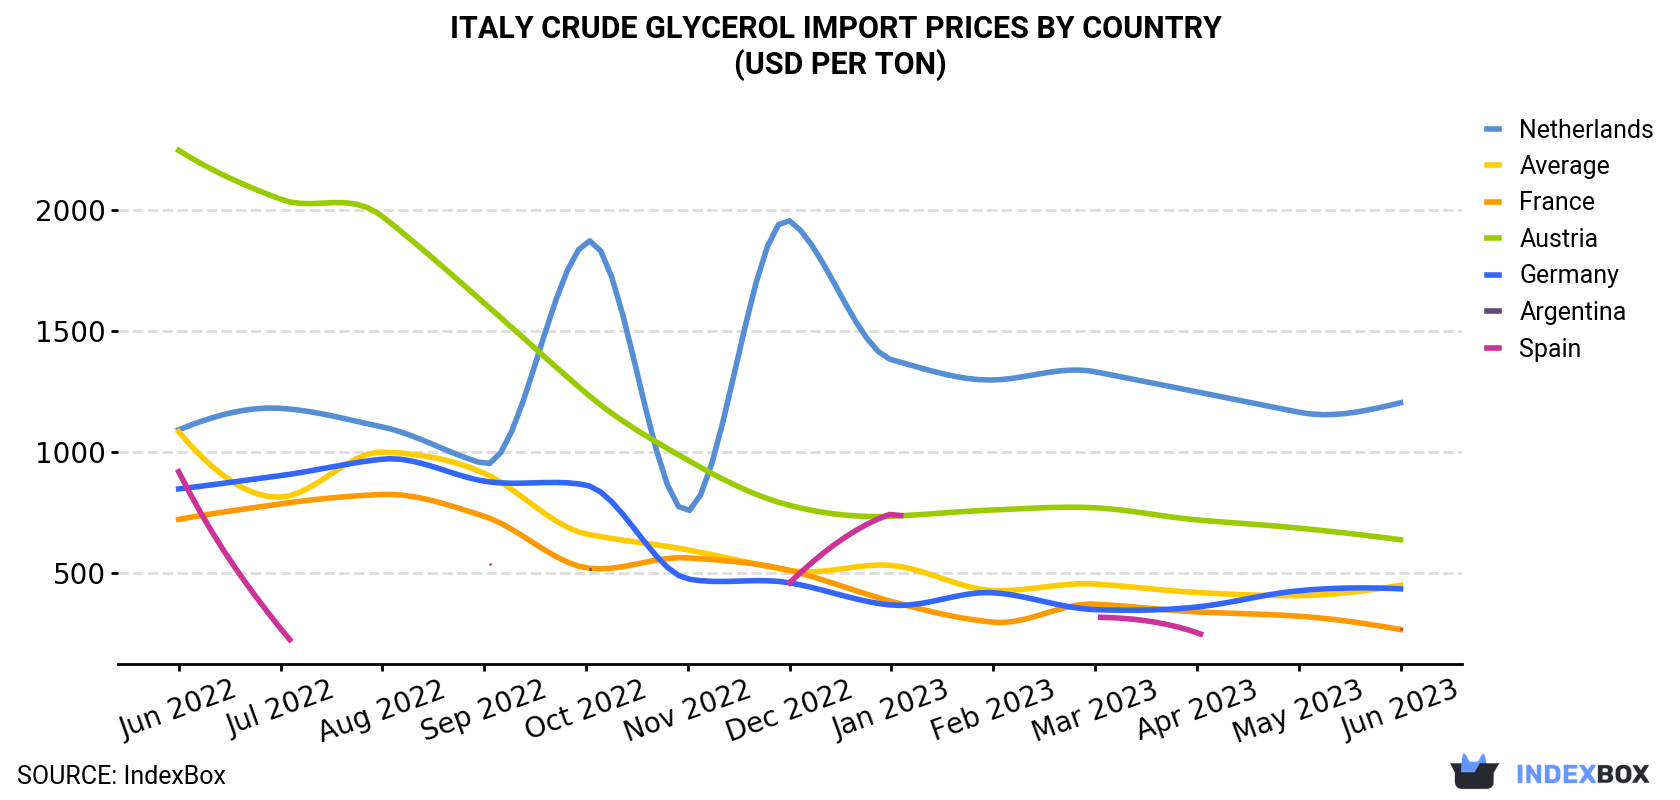 Italy Crude Glycerol Import Prices By Country (USD Per Ton)